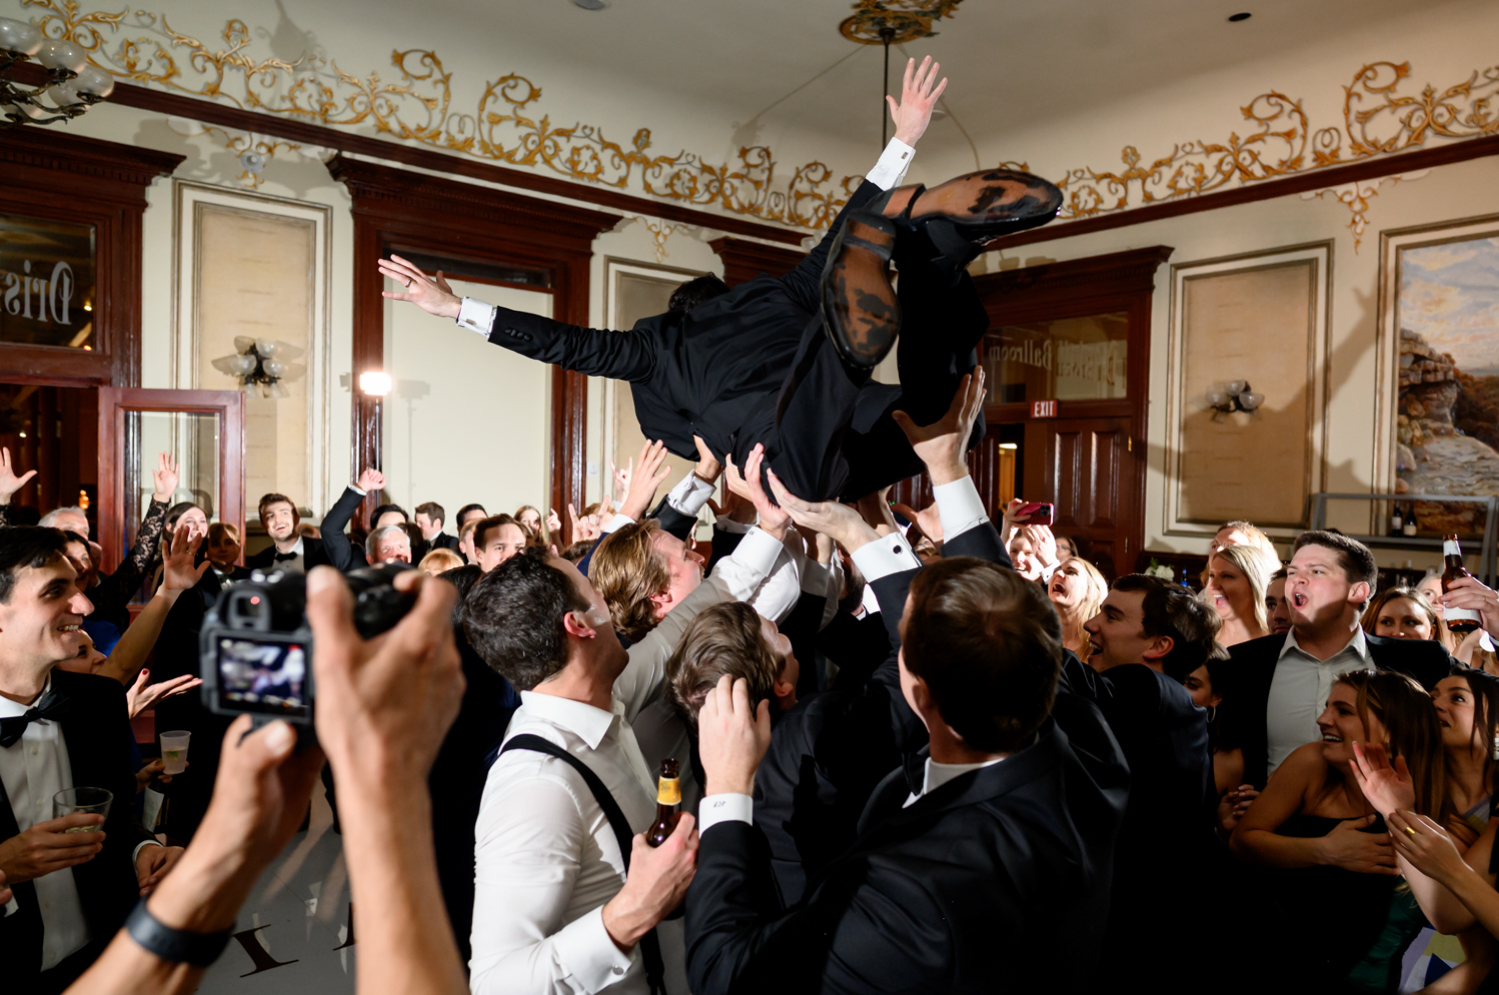 The groom being lifted by the crowd, holding his hands in the air.